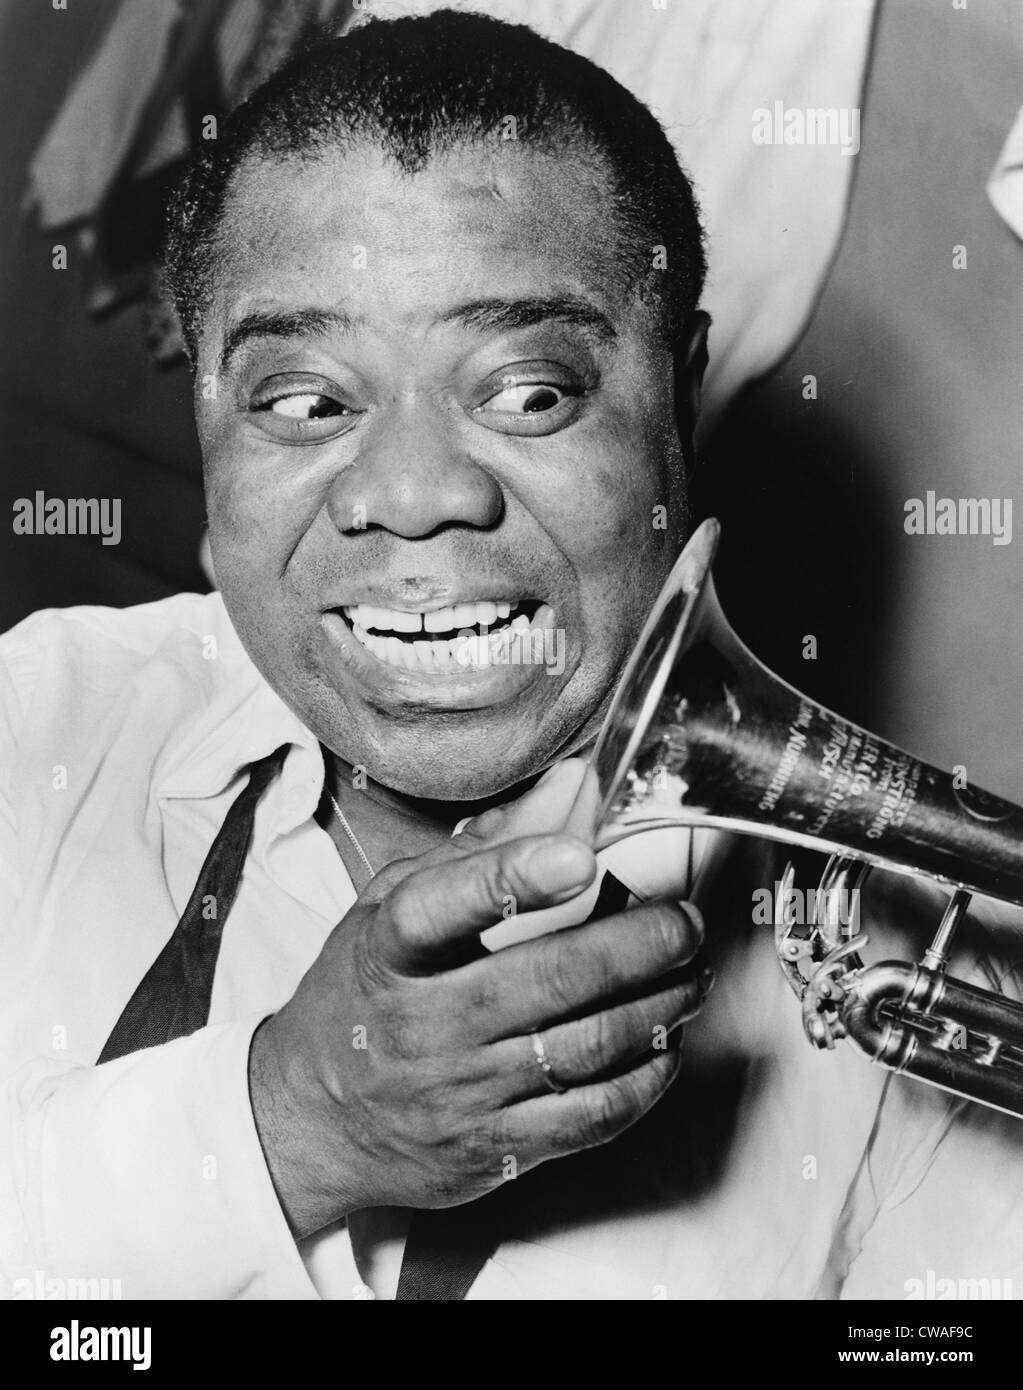 Louis Armstrong (1901-1971), African American Jazz musician, with his trademark smile and trumpet, 1953. Stock Photo